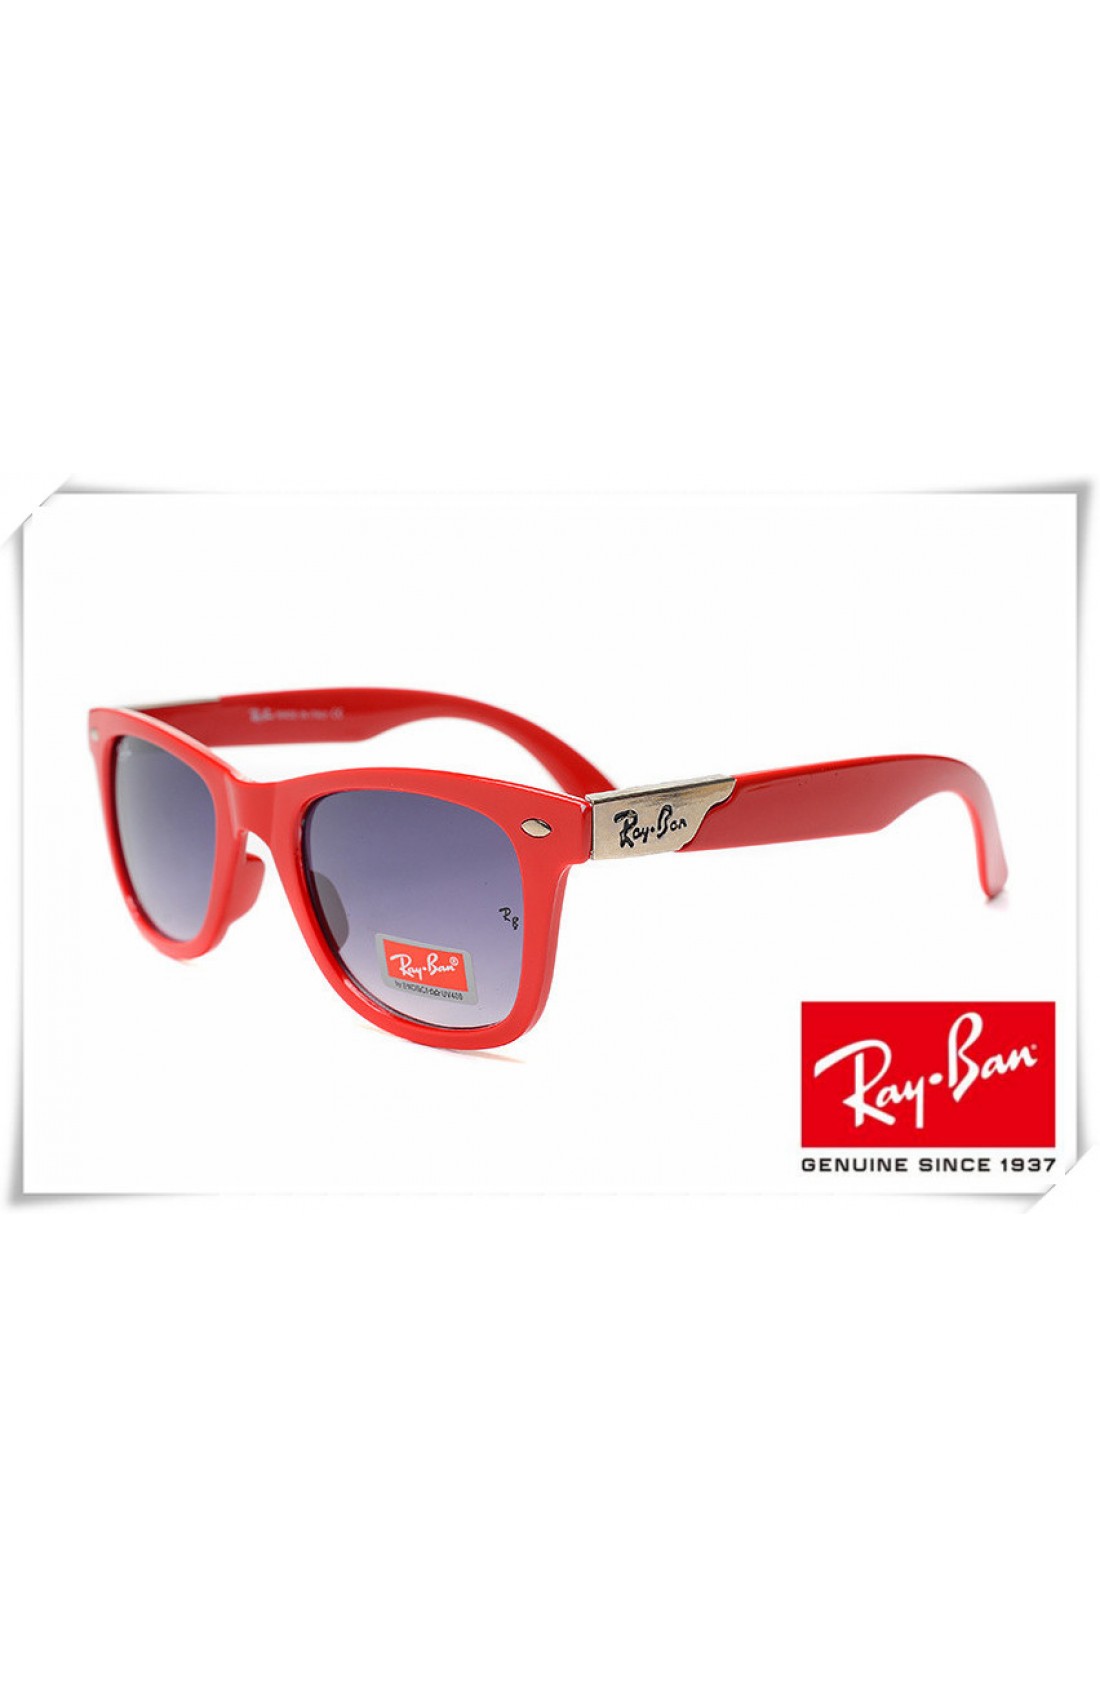 red lens ray ban sunglasses